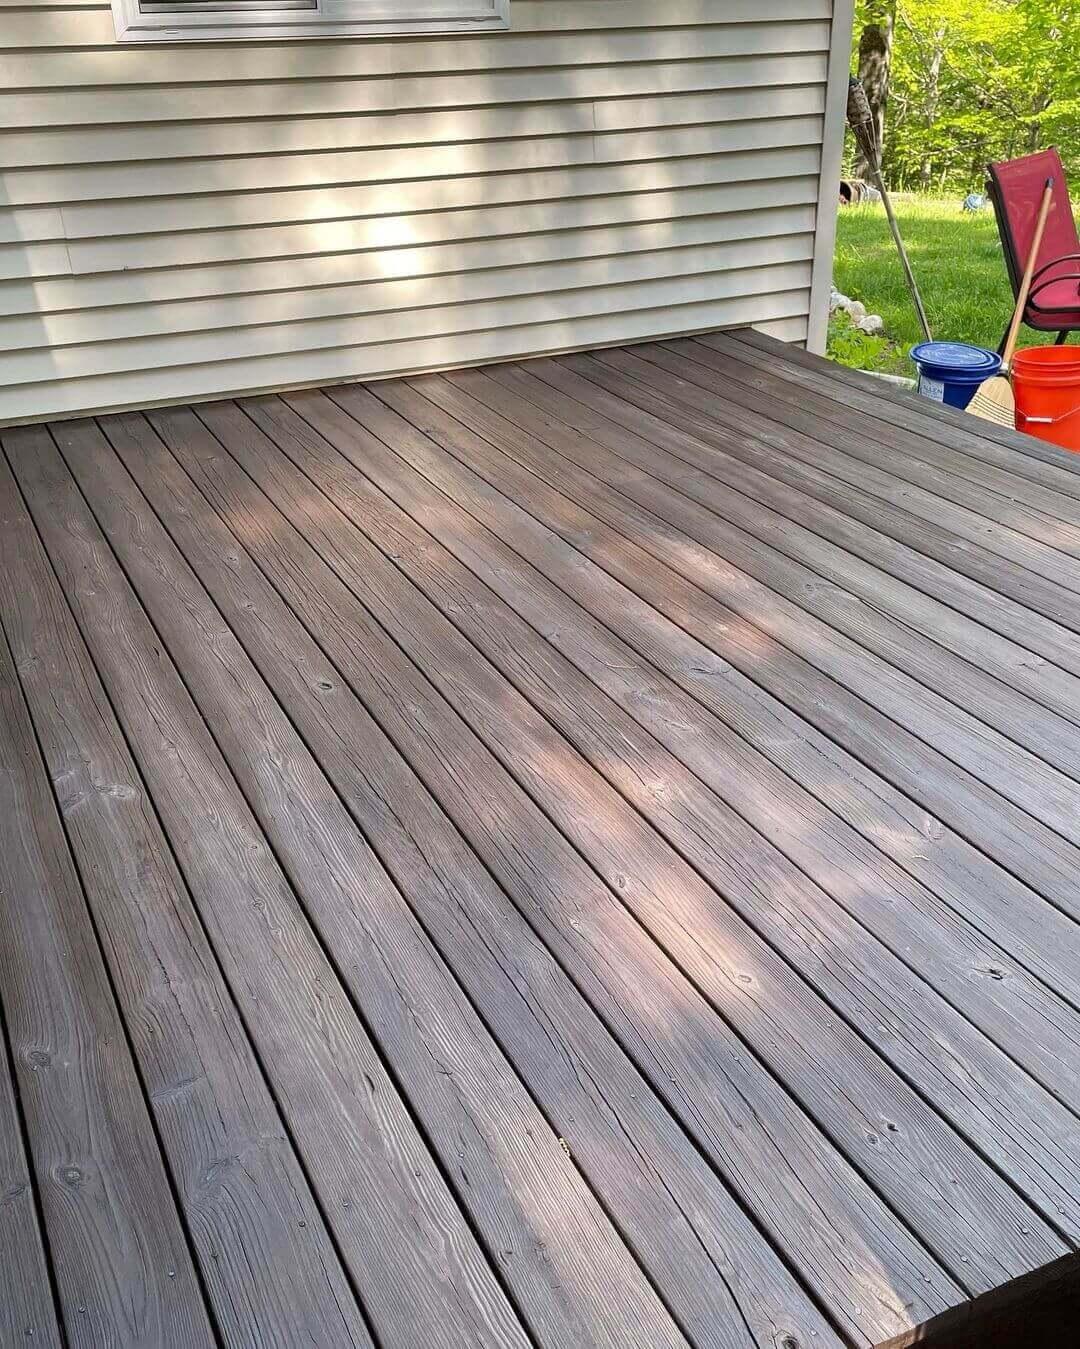 Deck painting and washing